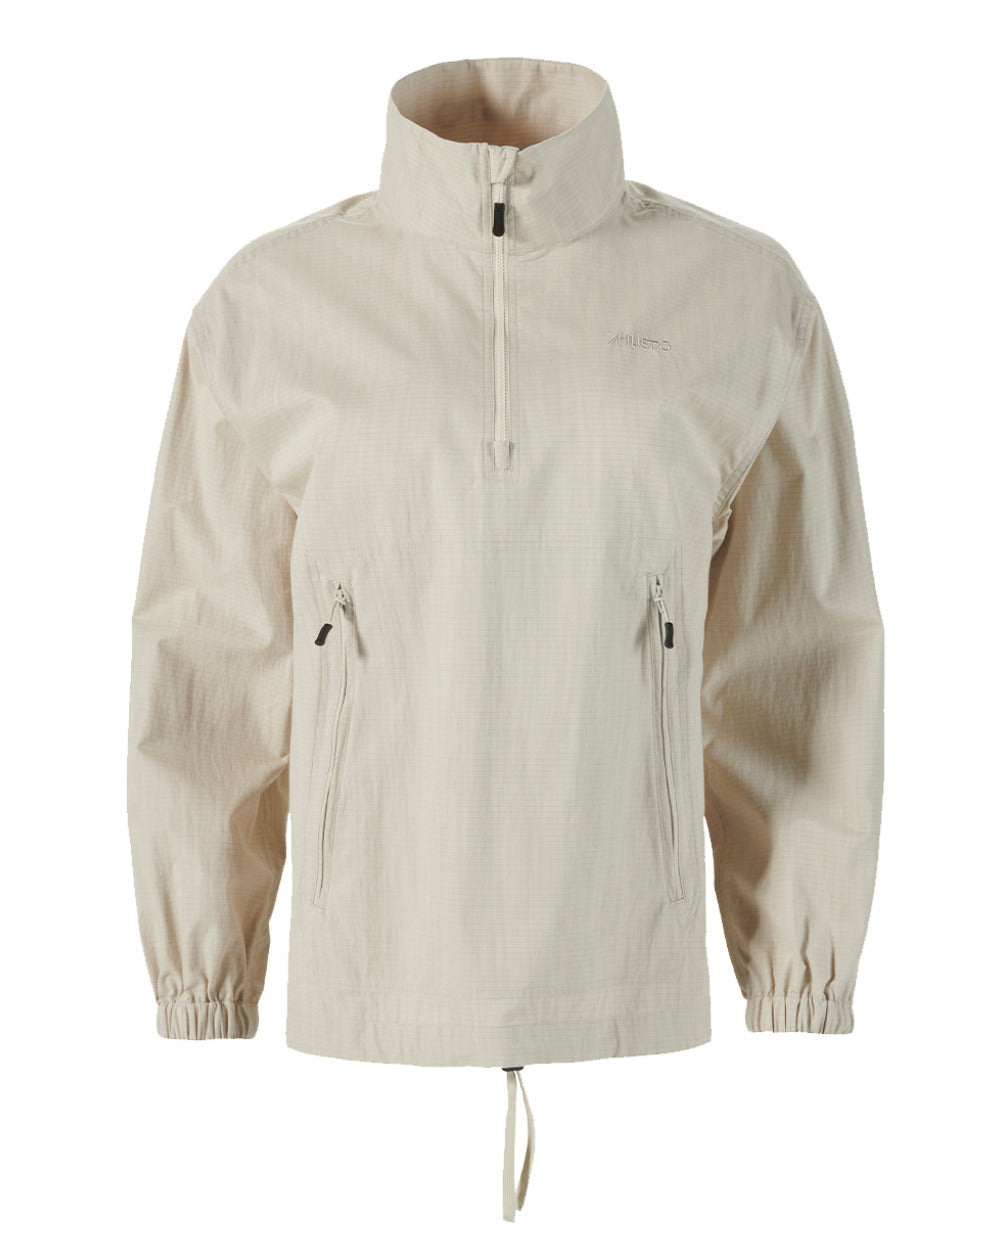 Pumice Coloured Musto Womens Falmouth Anorak Jacket On A White Background 